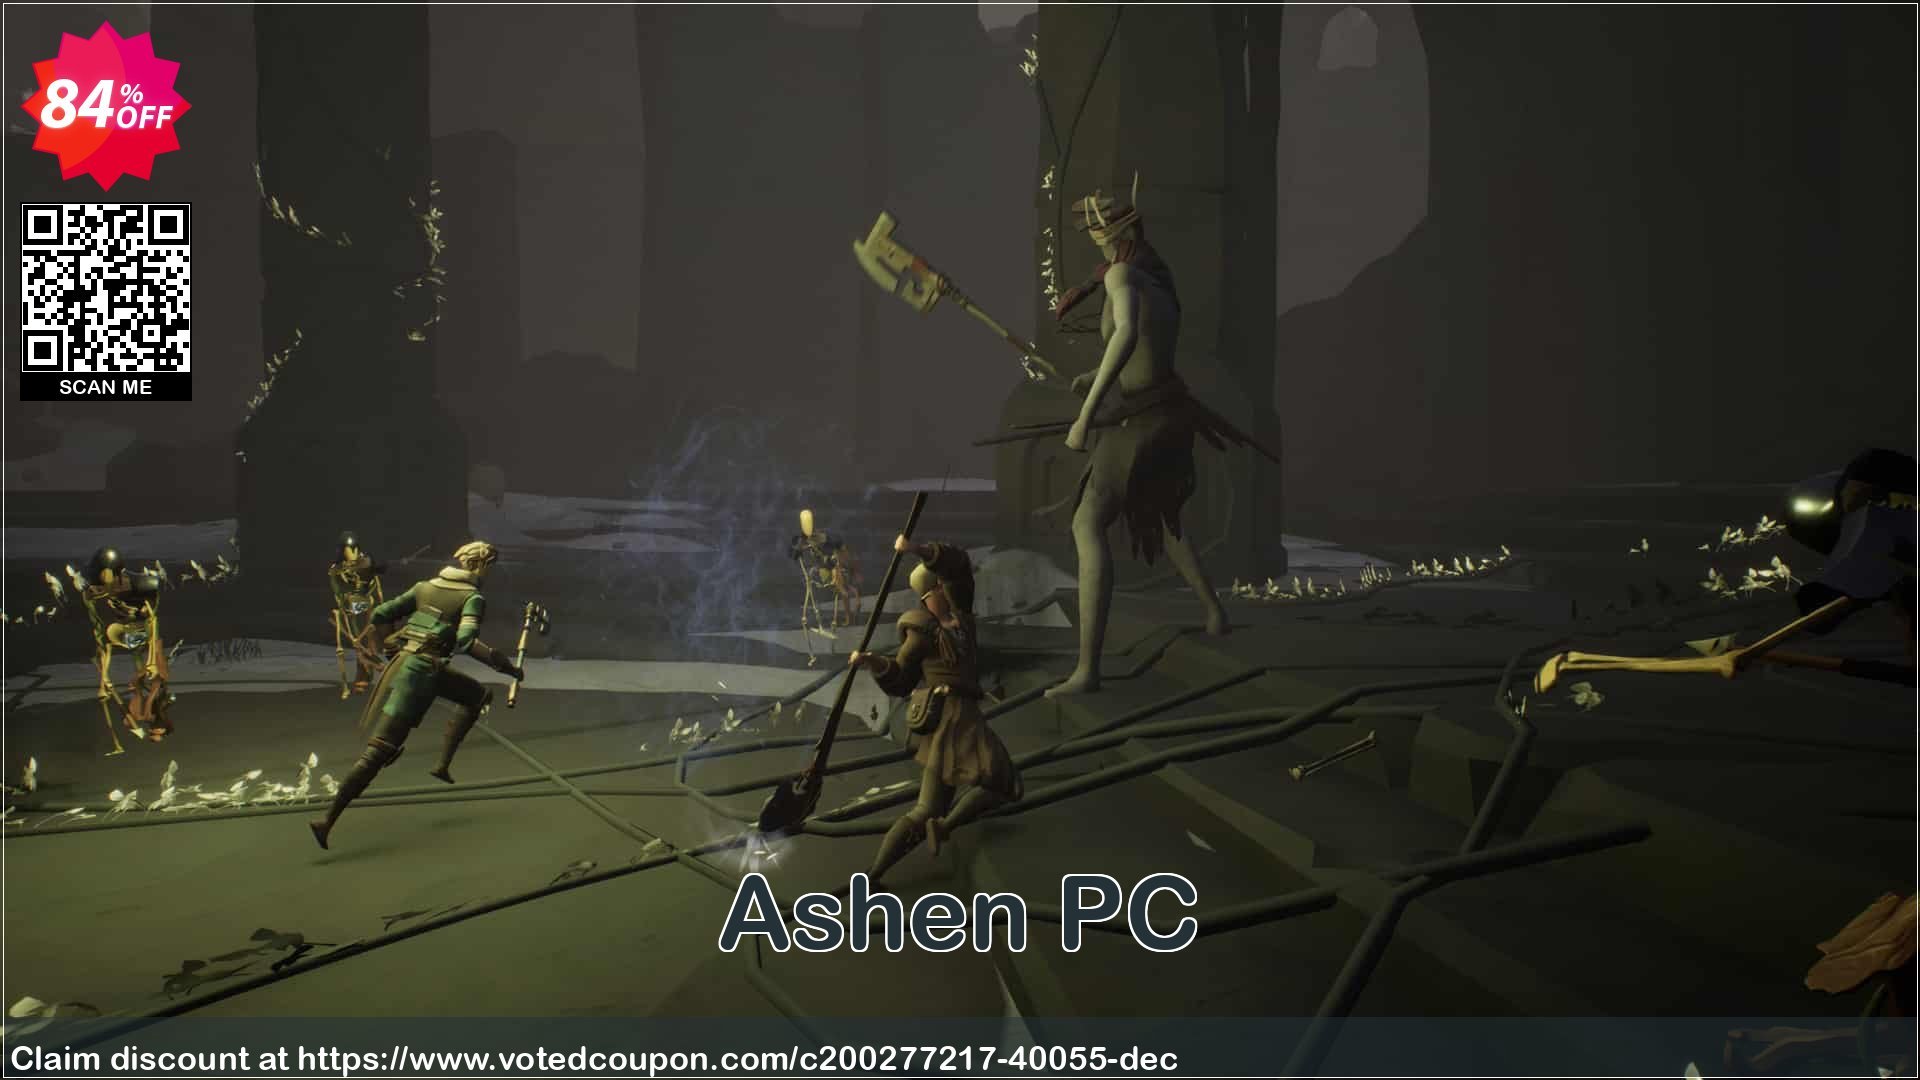 Ashen PC Coupon Code May 2024, 84% OFF - VotedCoupon